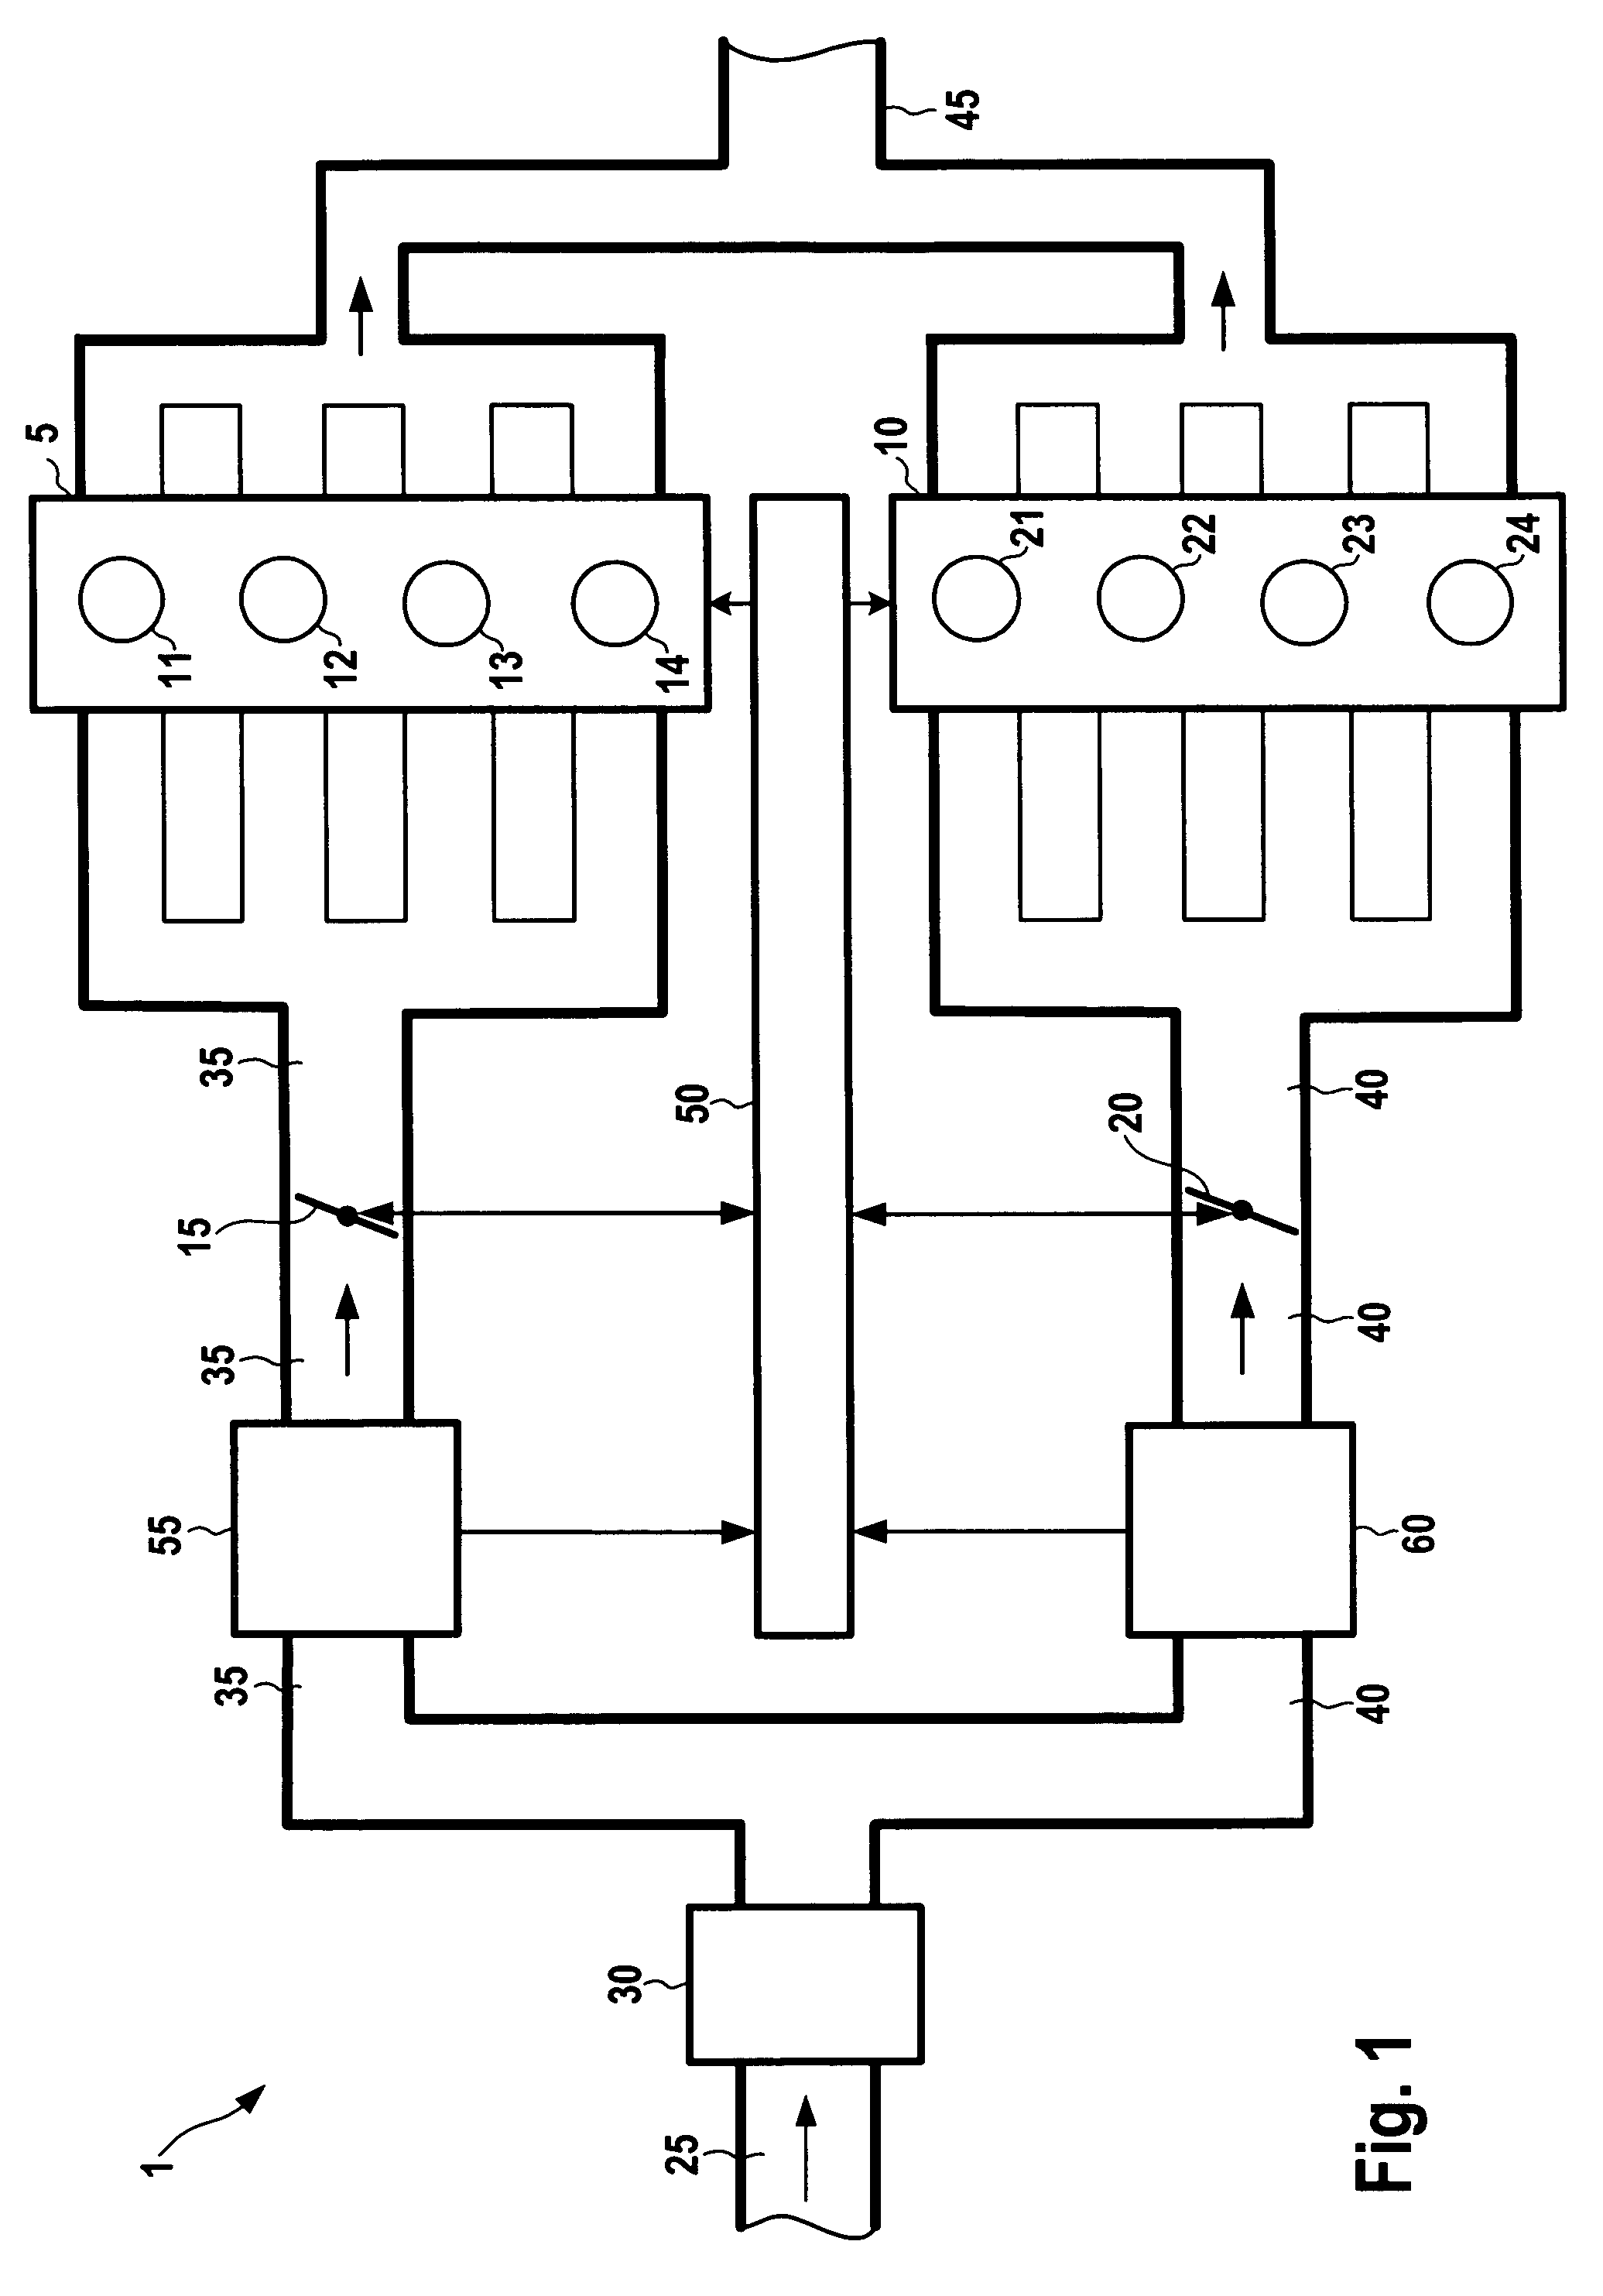 Method for operating an internal combustion engine having a plurality of cylinder banks